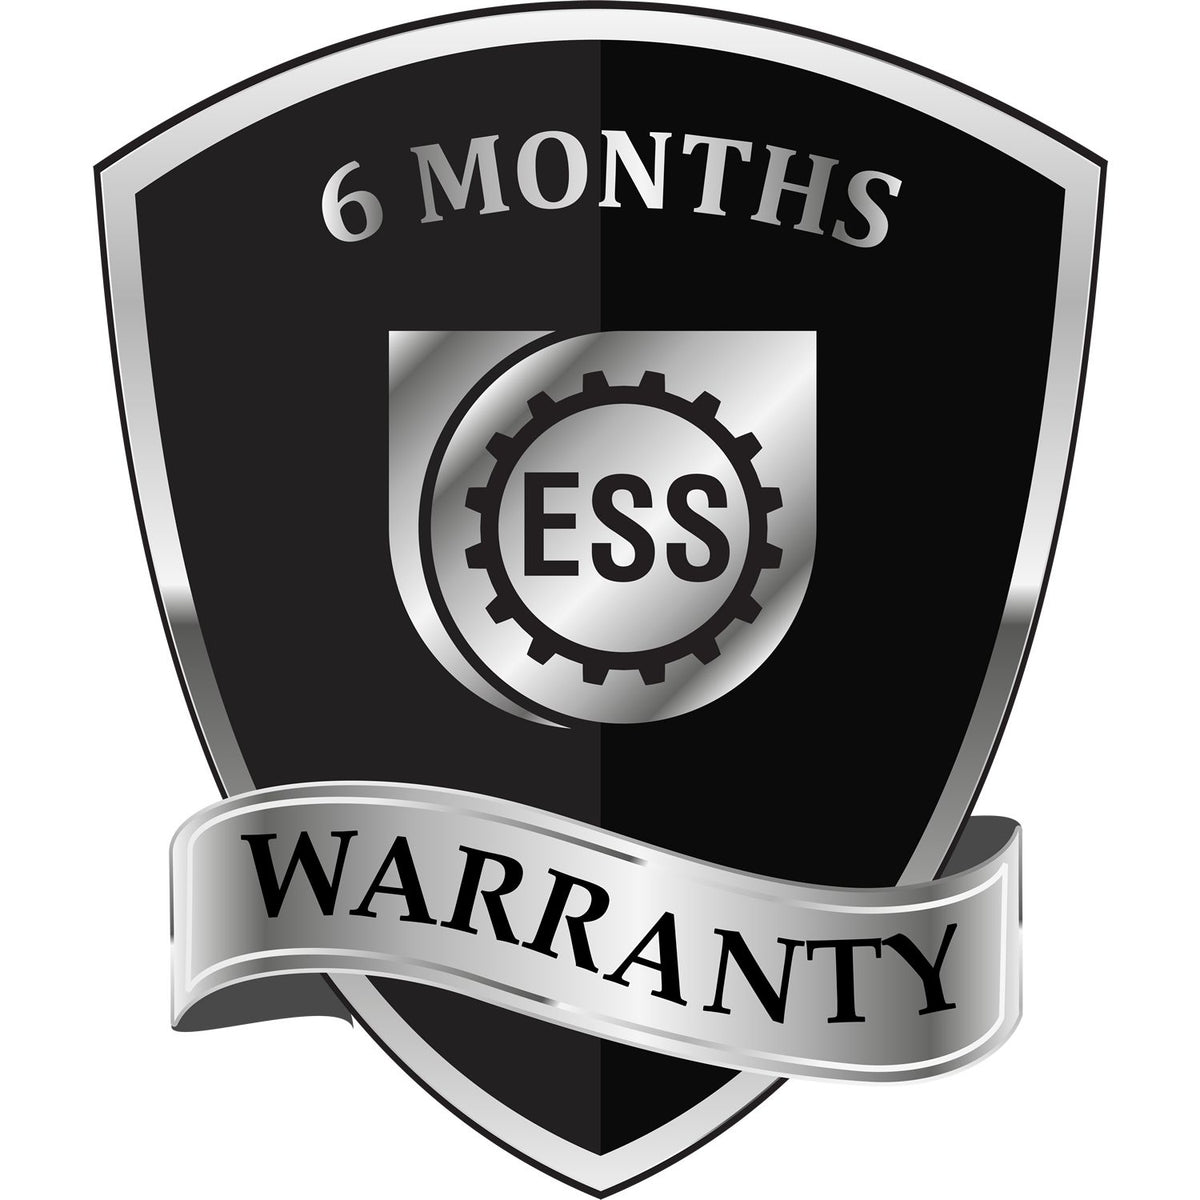 A badge or emblem showing a warranty icon for the PSI South Carolina Notary Stamp